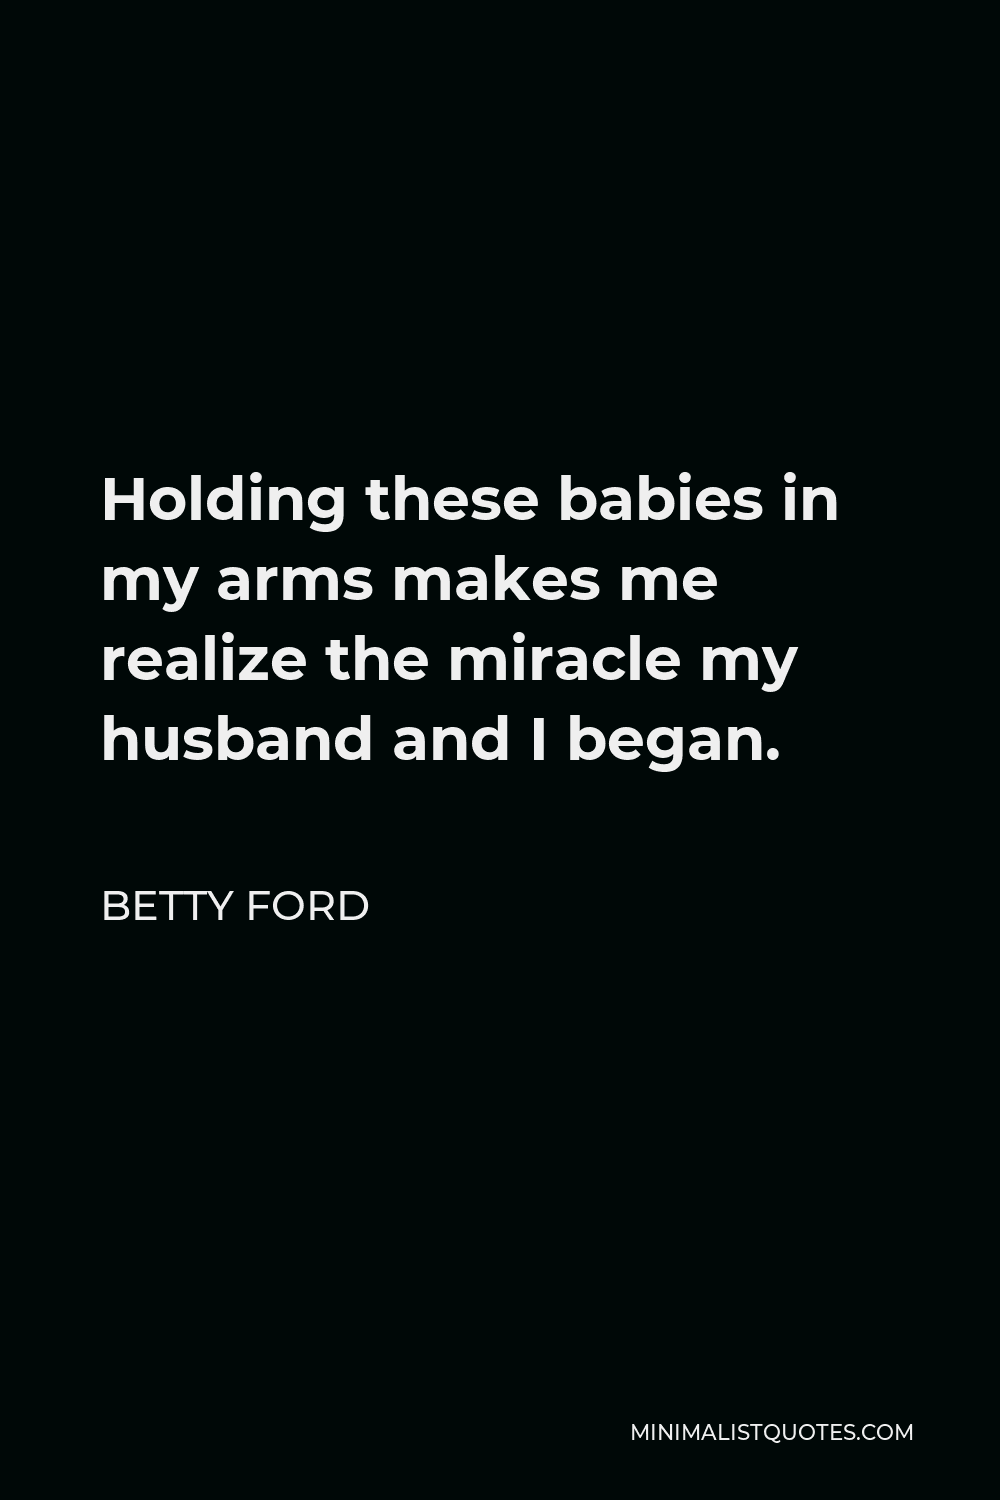 Betty Ford Quote - Holding these babies in my arms makes me realize the miracle my husband and I began.